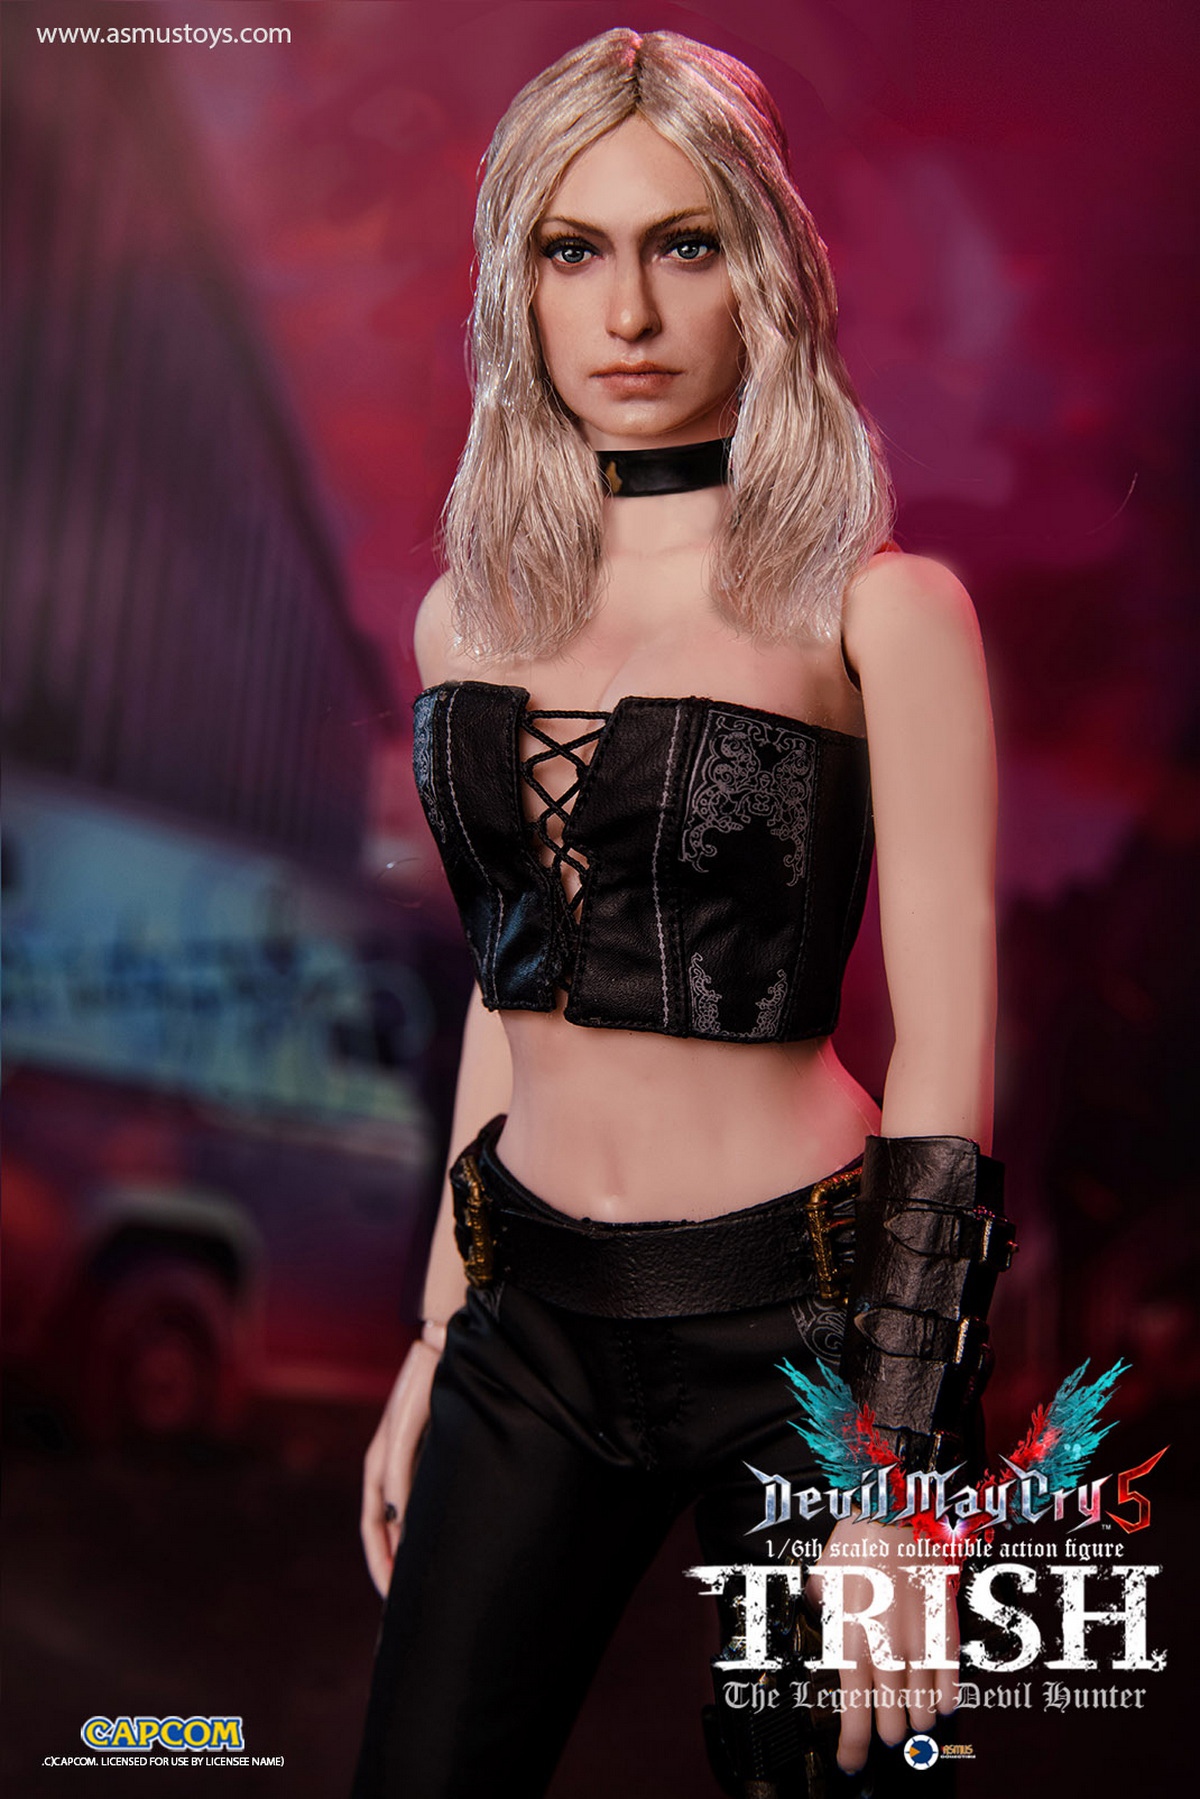 NEW PRODUCT: Asmus New Toys: "Devil May Cry 5" - Trish (DMC504) 0325